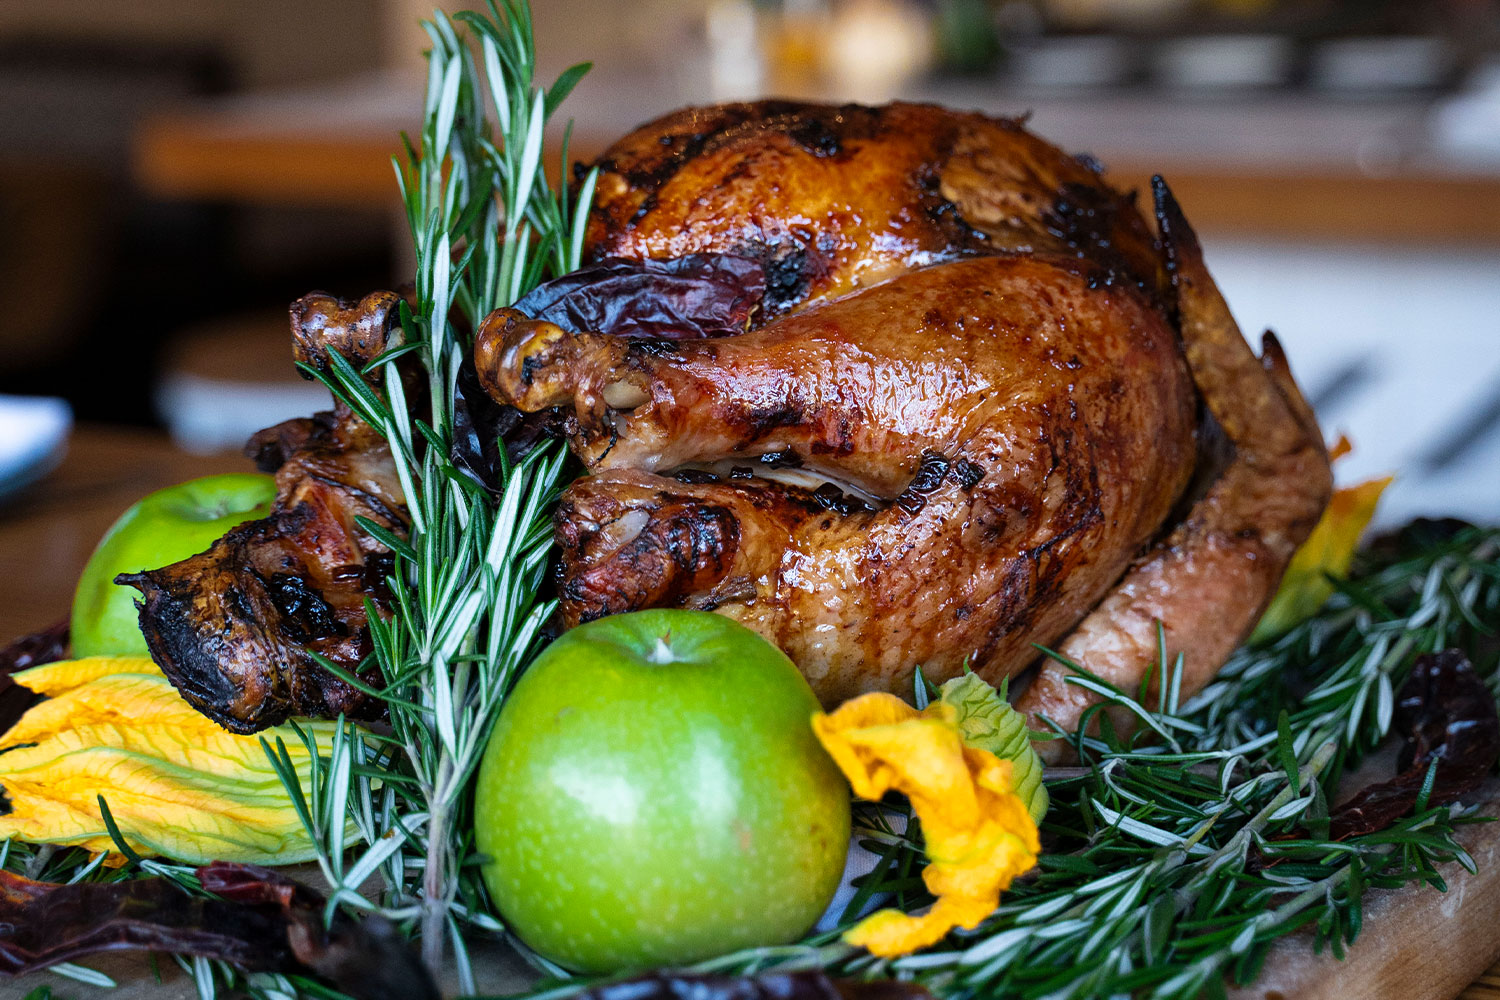 A glossy, charred turkey lays with rosemary garnish, yellow flowers, and green apples